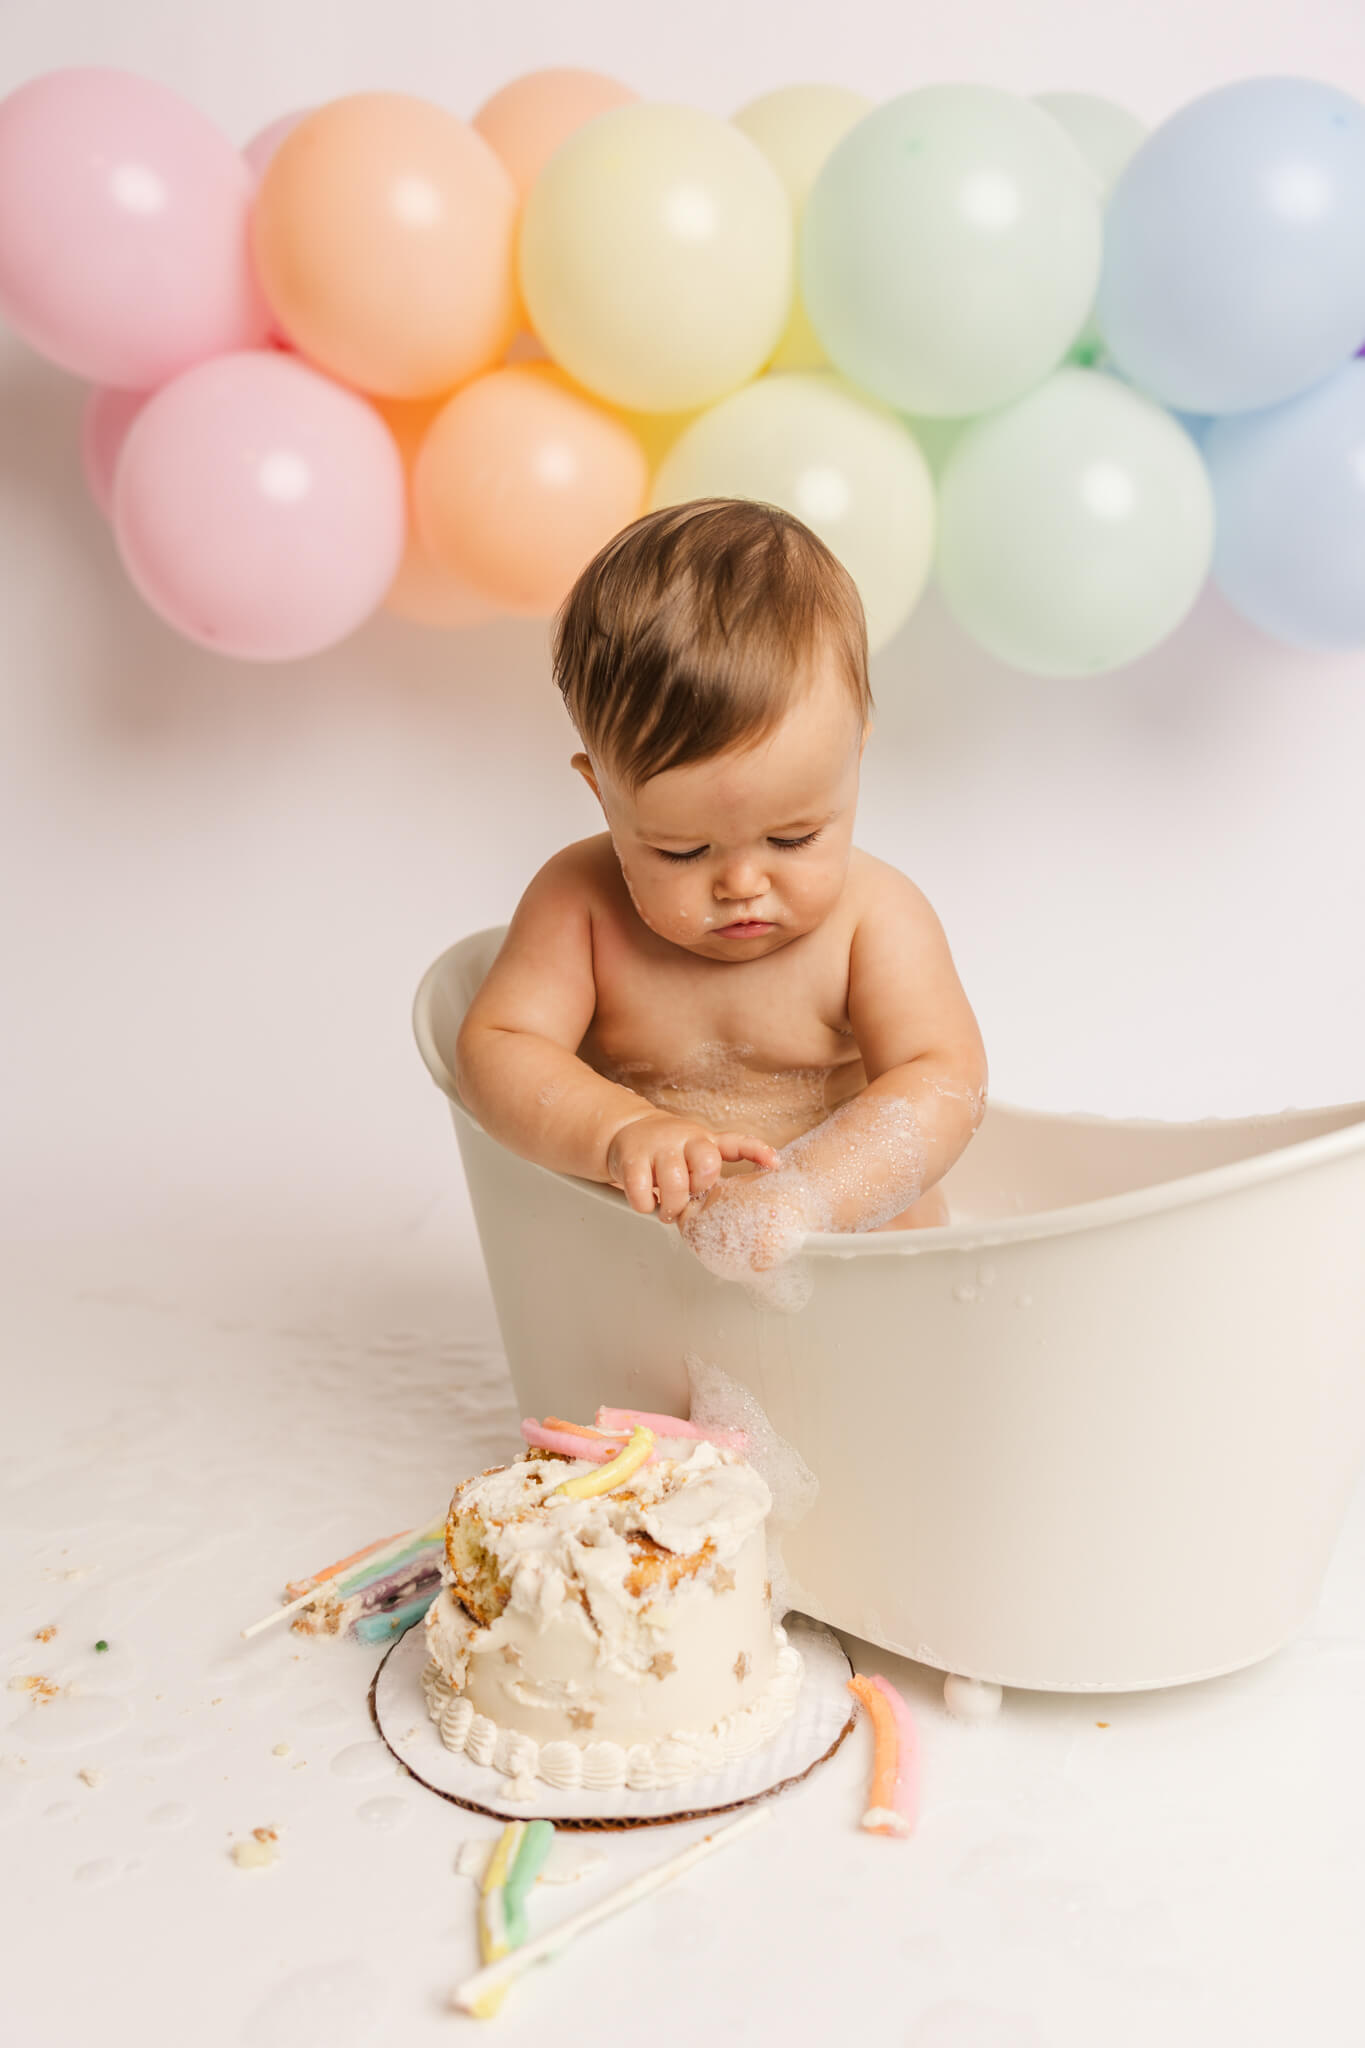 One year old girl getting cleaned up in bathtub after cake smash session.